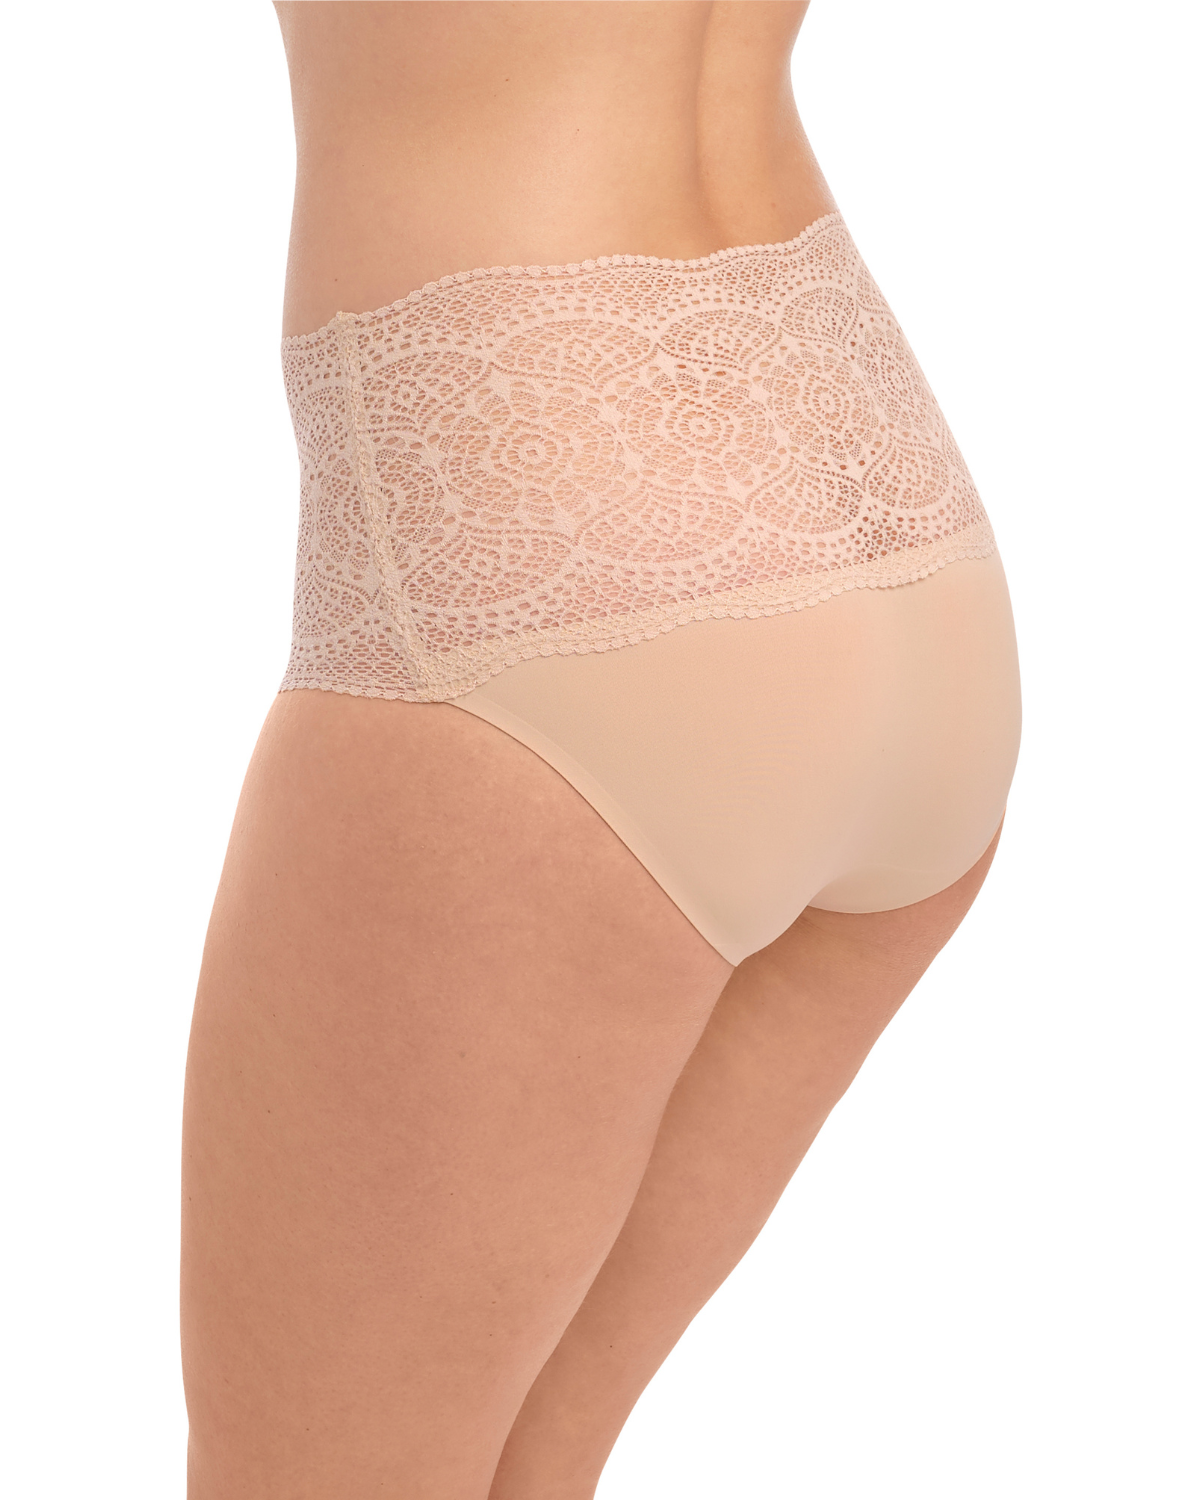 Model wearing a wide lace band brief panty in beige